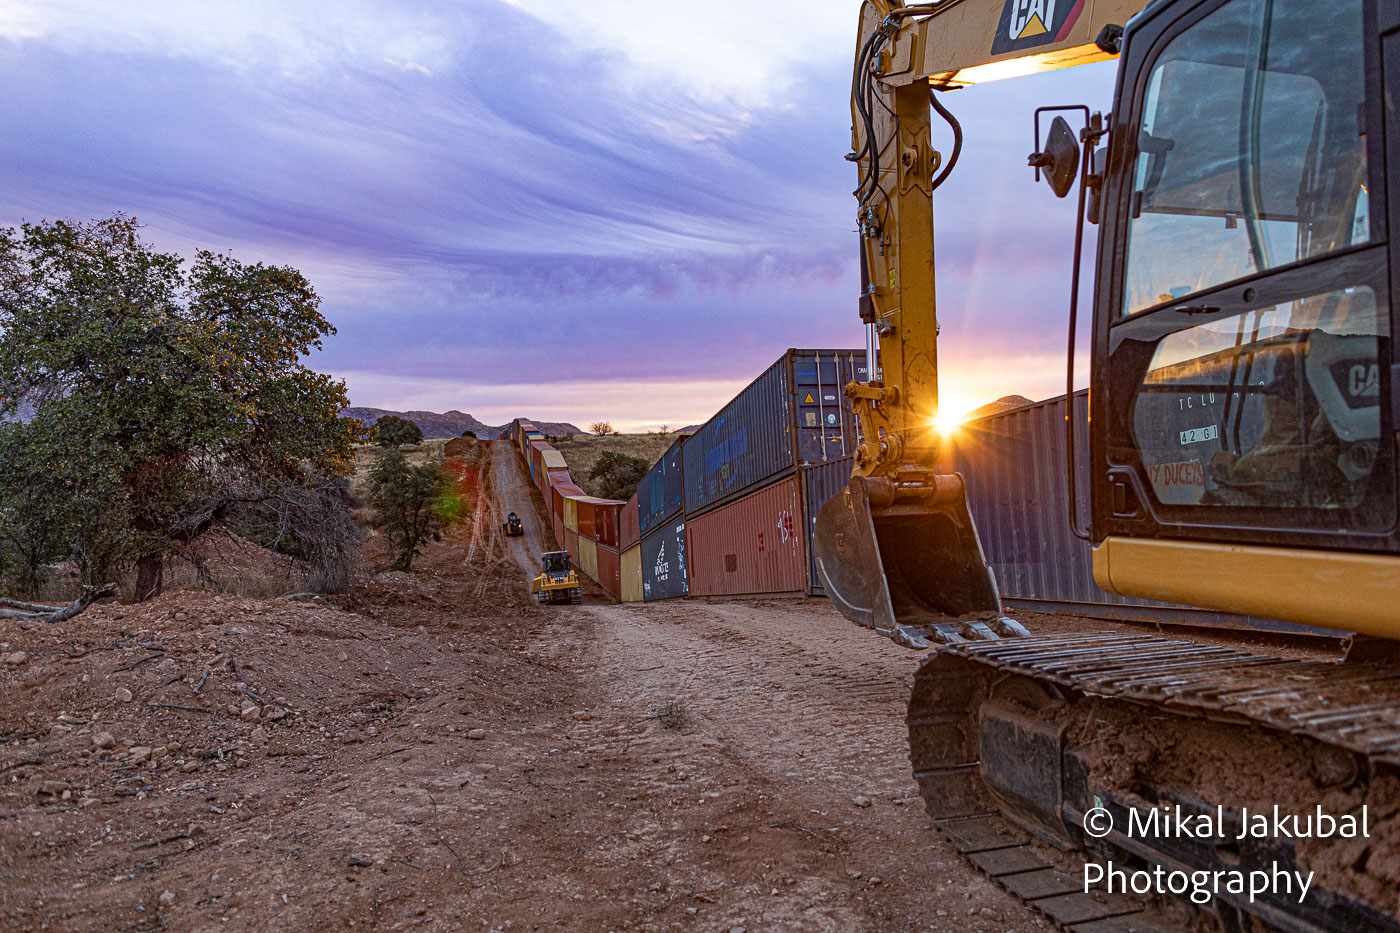 A large yellow excavator enters the photo from the right as the sun flares next to the bucket at dawn. Past the excavator, there is a line of double-stacked shipping containers next to a dirt road.